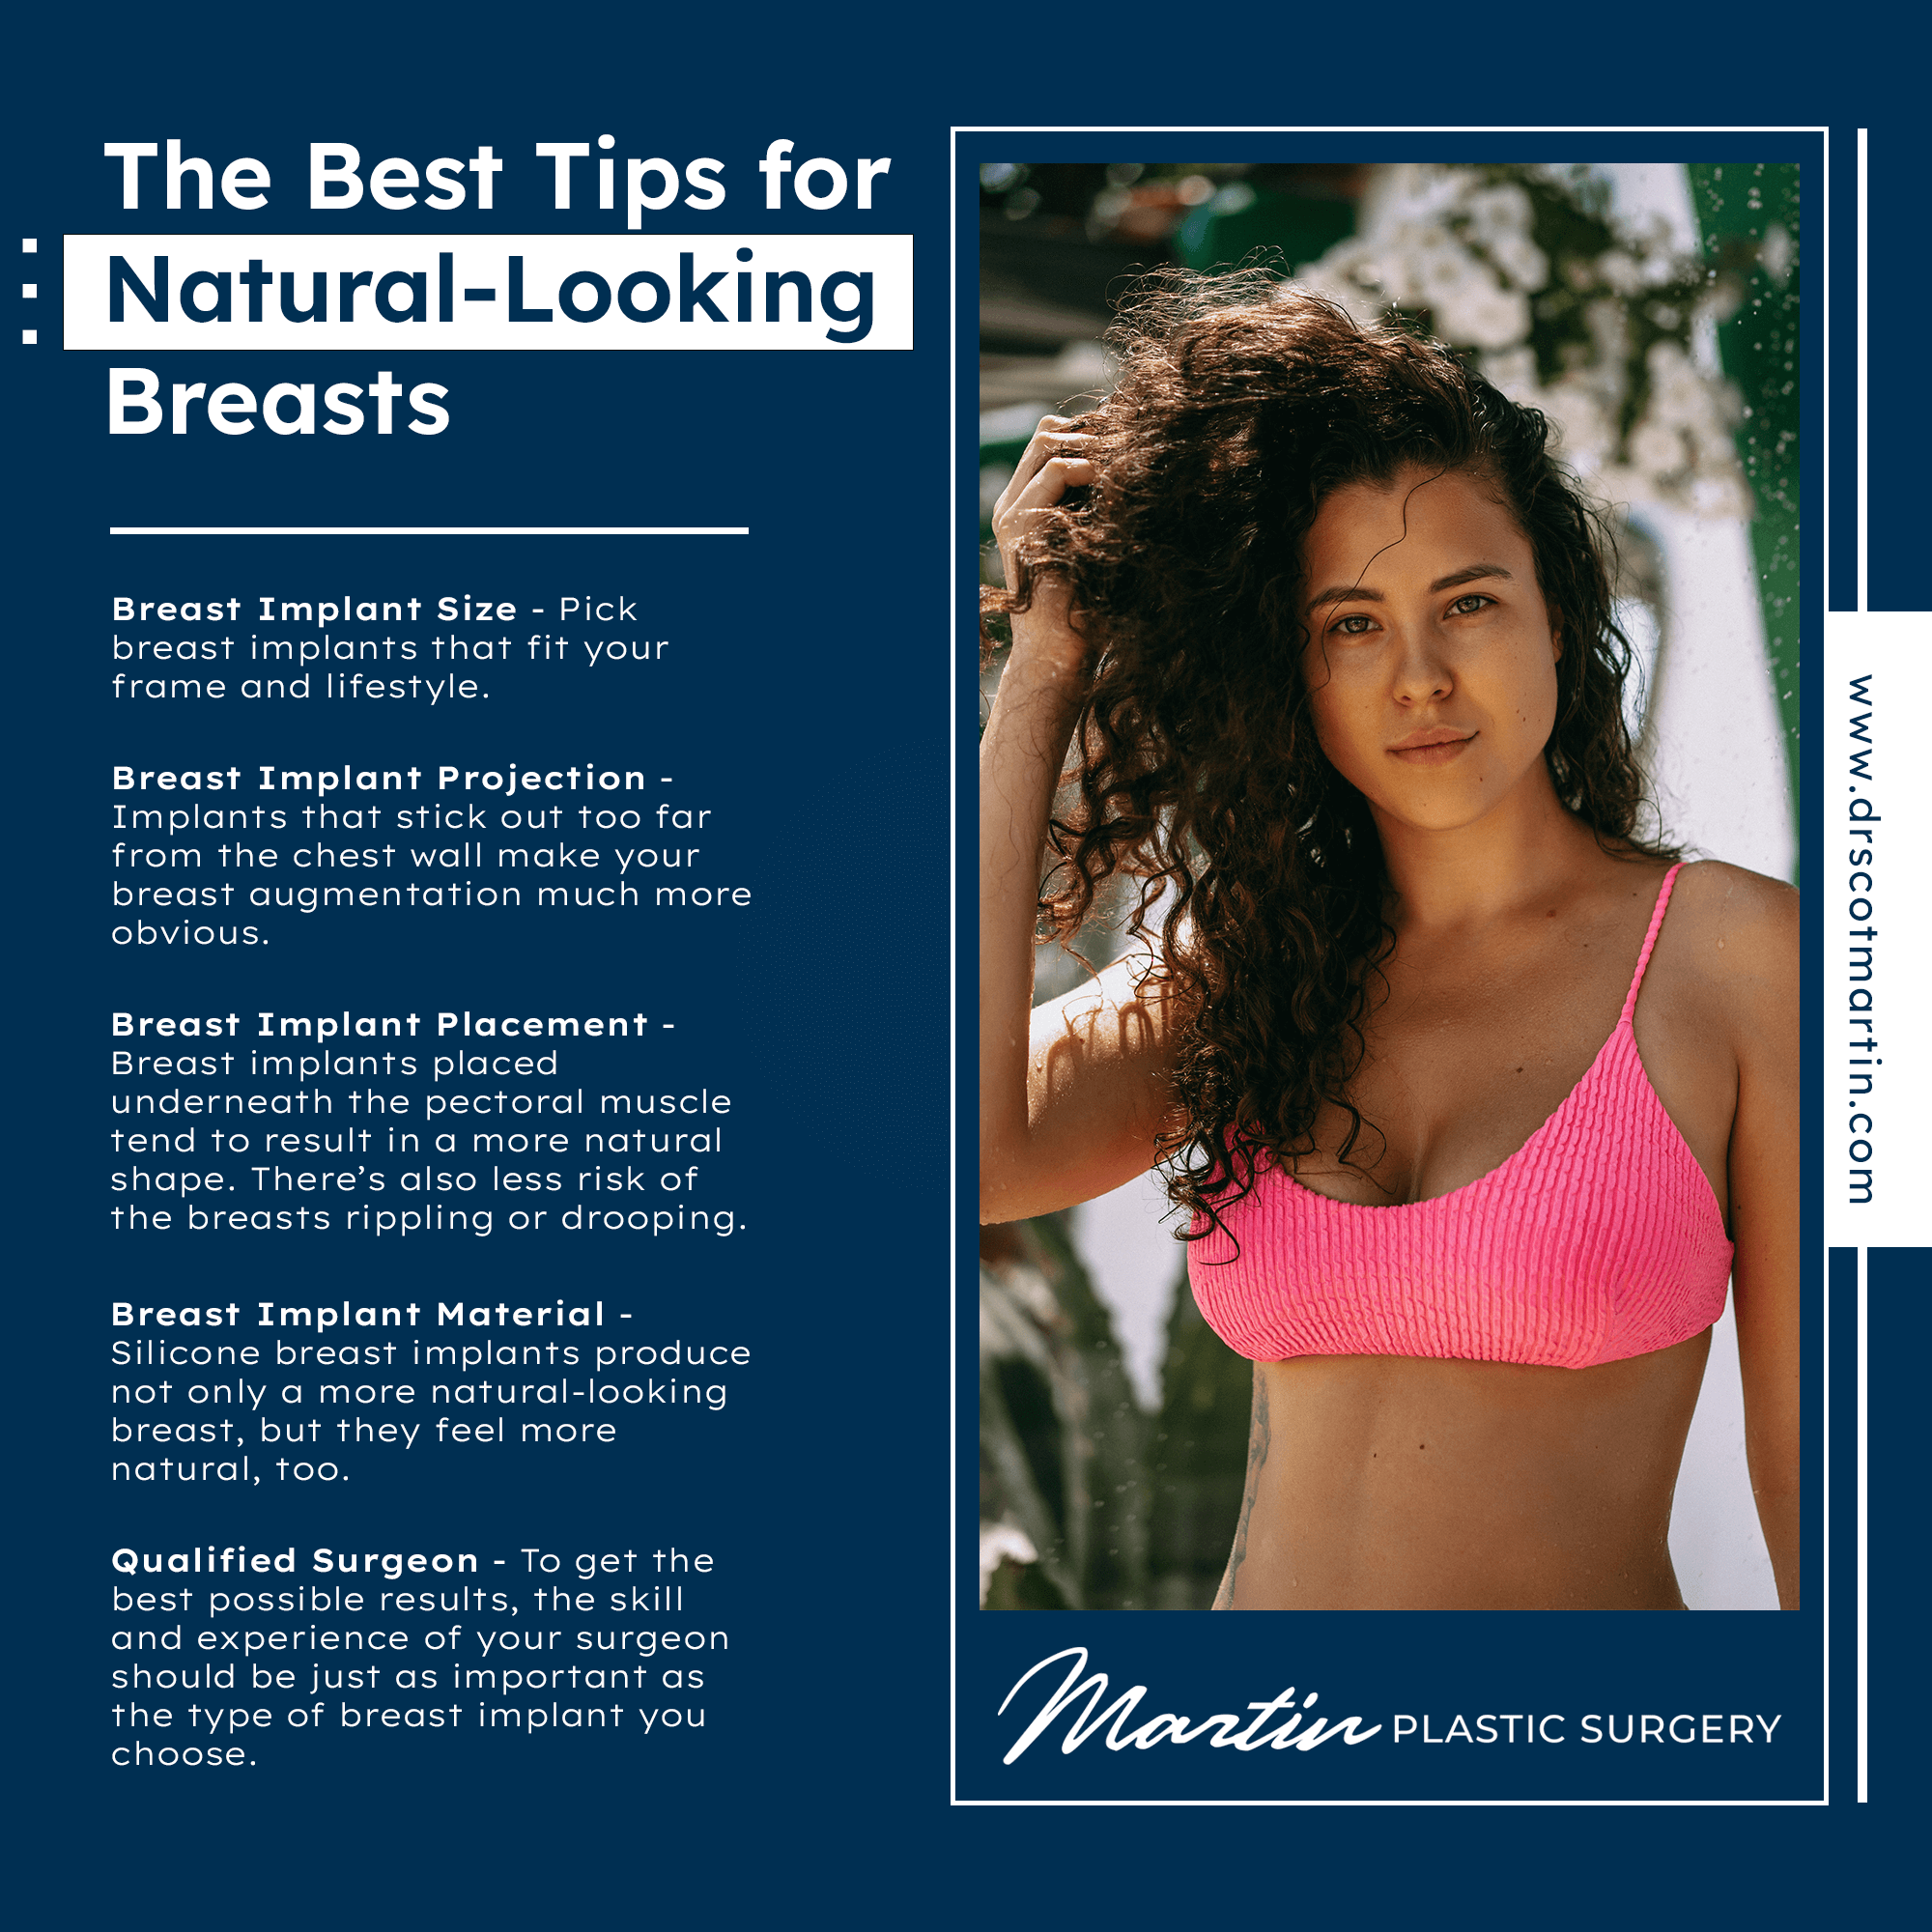 The Best Tips for Natural-Looking Breasts